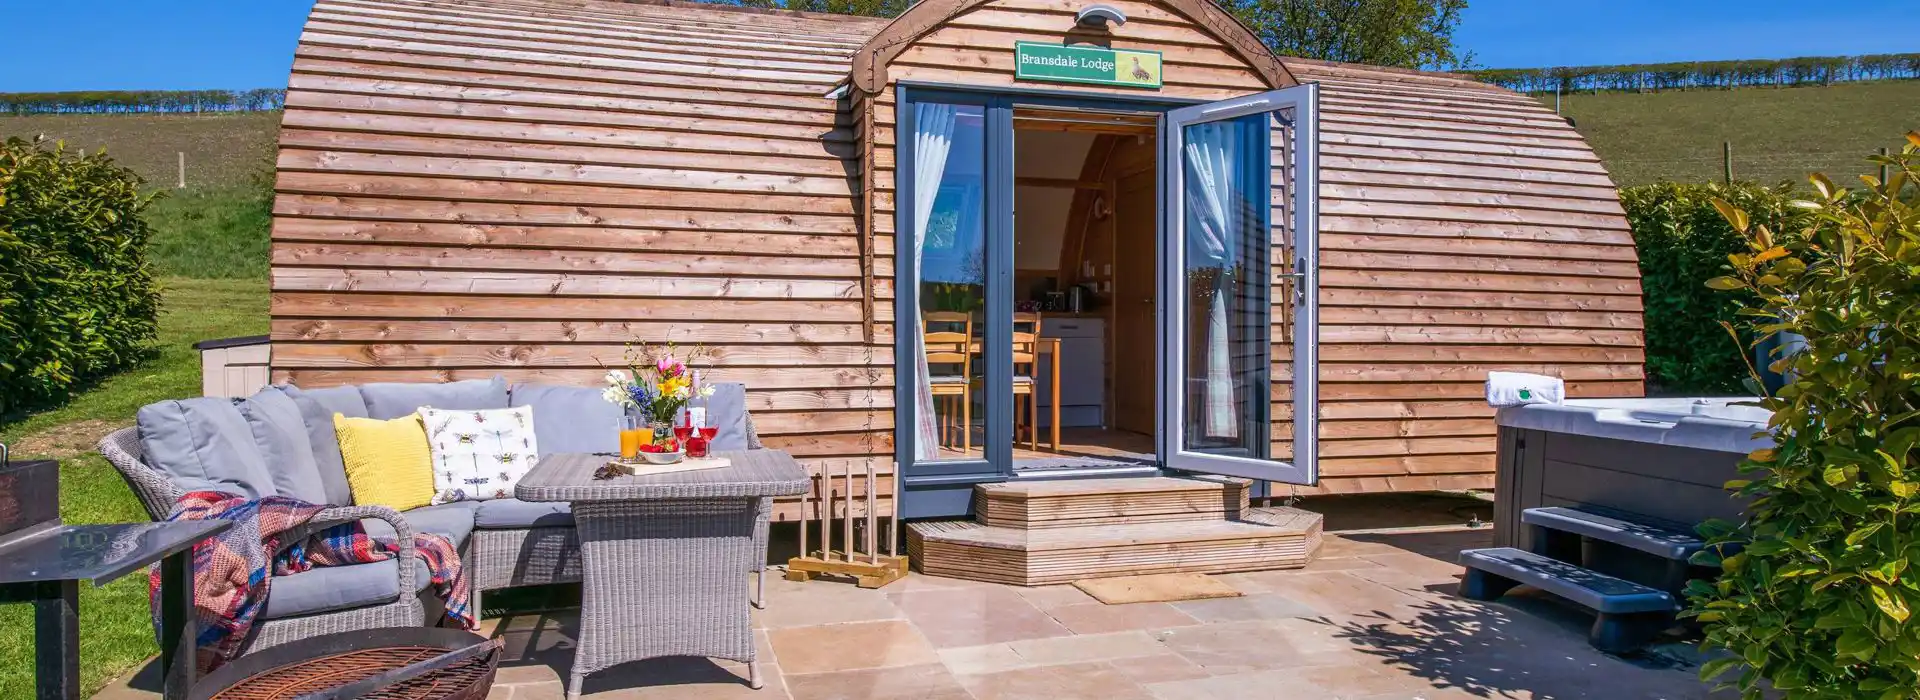 Dog friendly camping and glamping pods in North Yorkshire